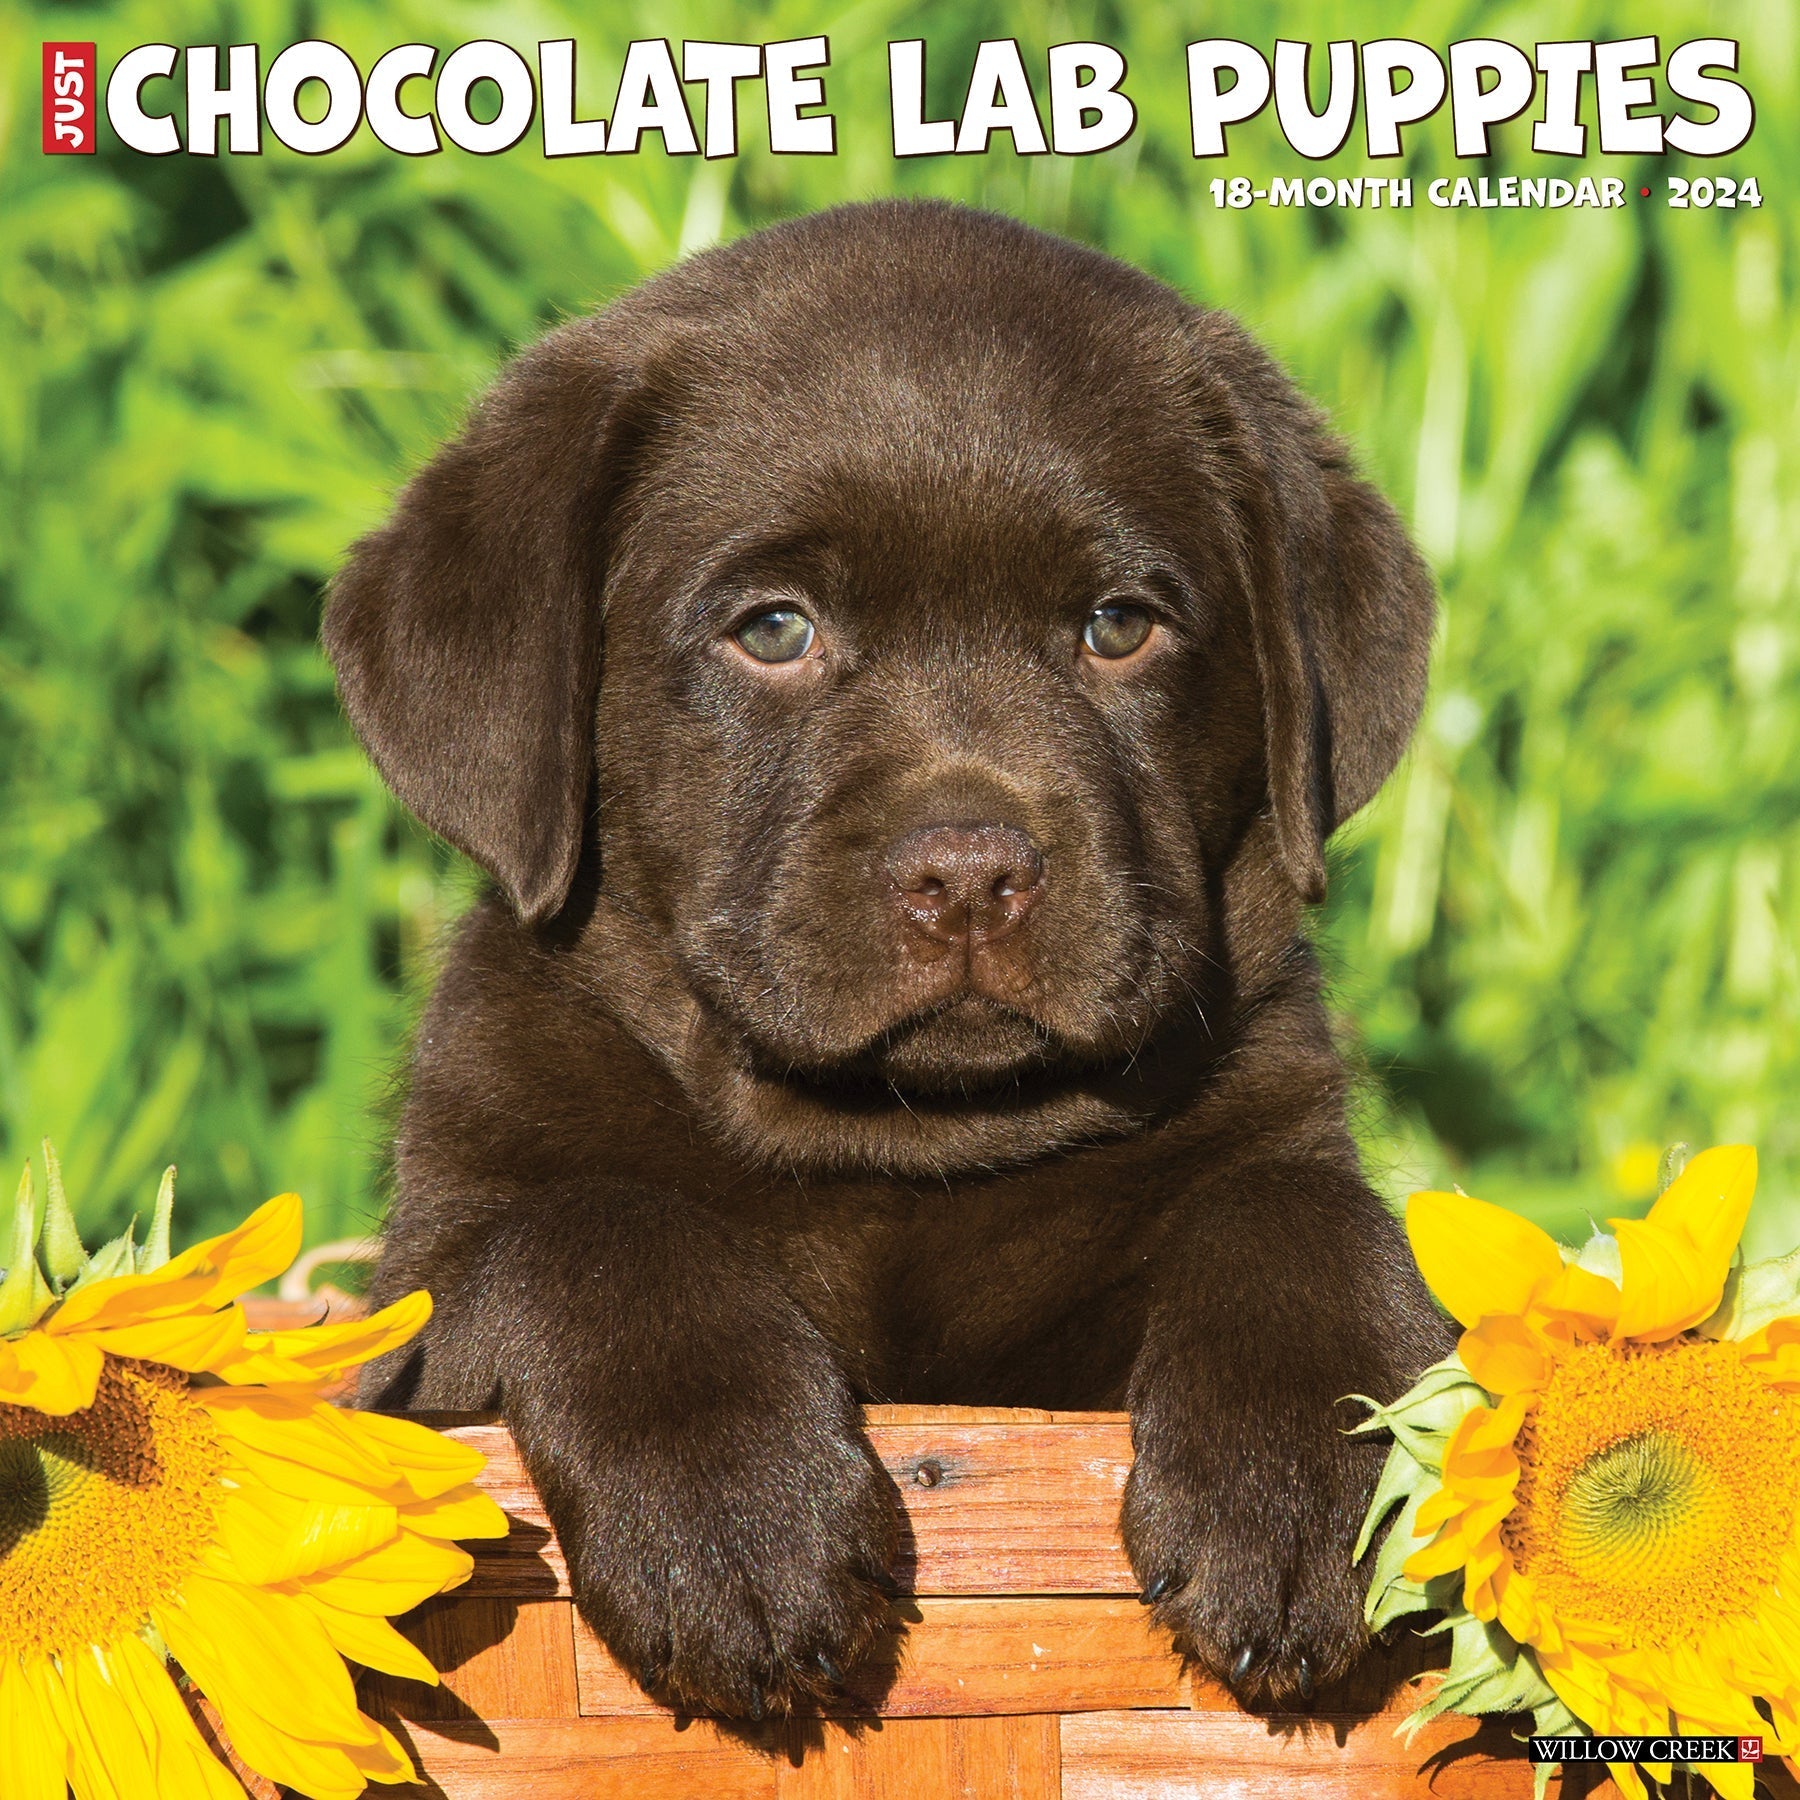 2024 Just Chocolate Lab Puppies - Square Wall Calendar US